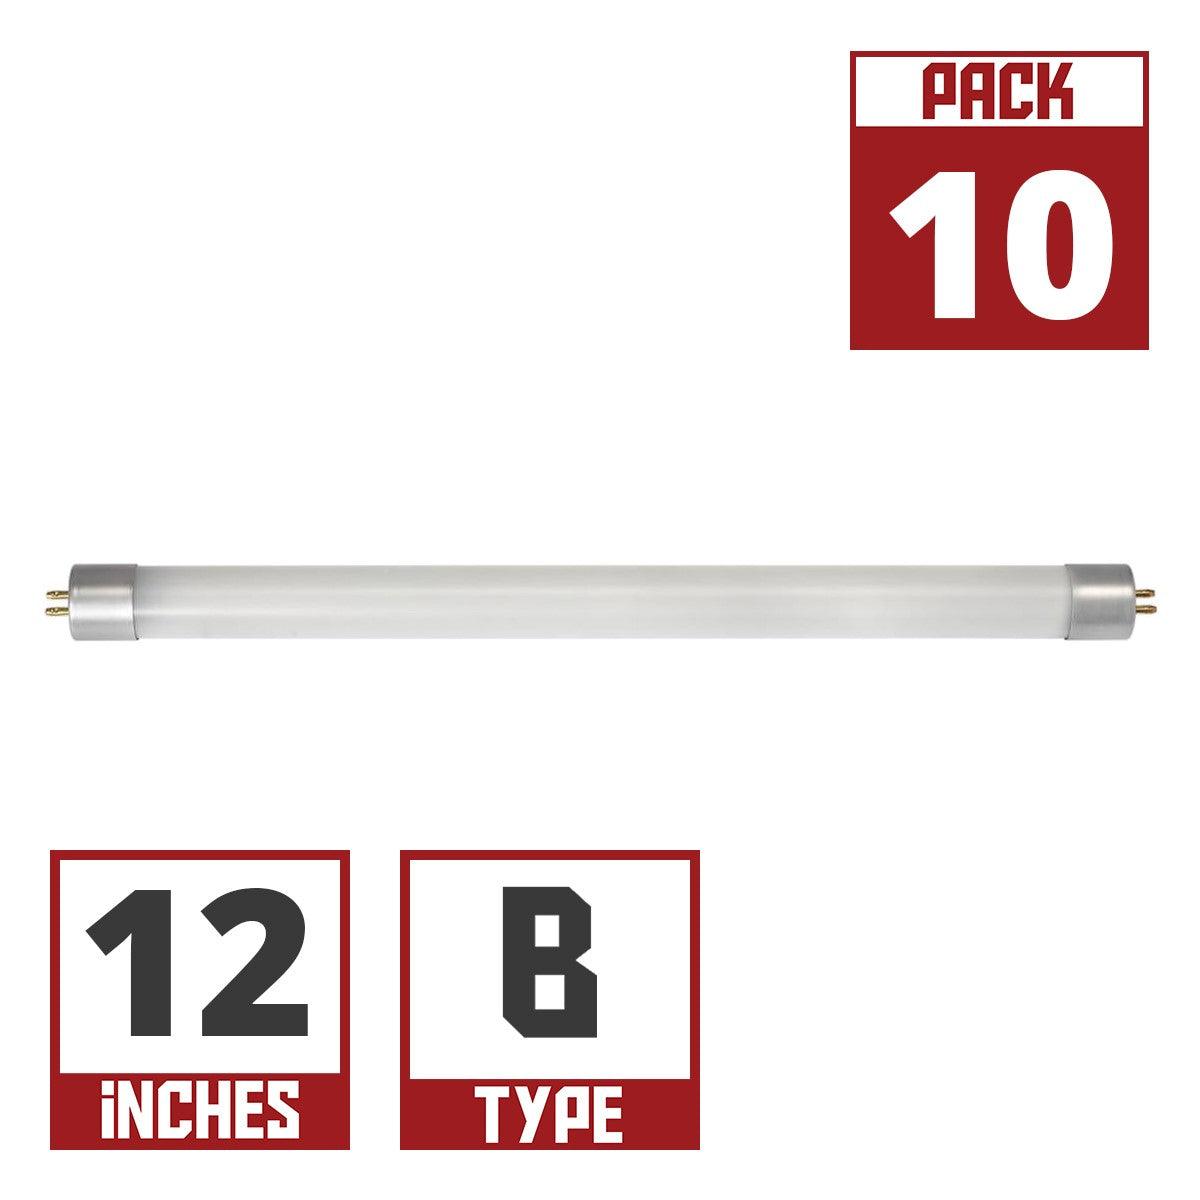 12 Inch LED mini T5 Tube, 4 watt, 400 Lumens, 6500K, F6T5 Replacement, Ballast Bypass Double End, G5 Base (Case Of 10) - Bees Lighting